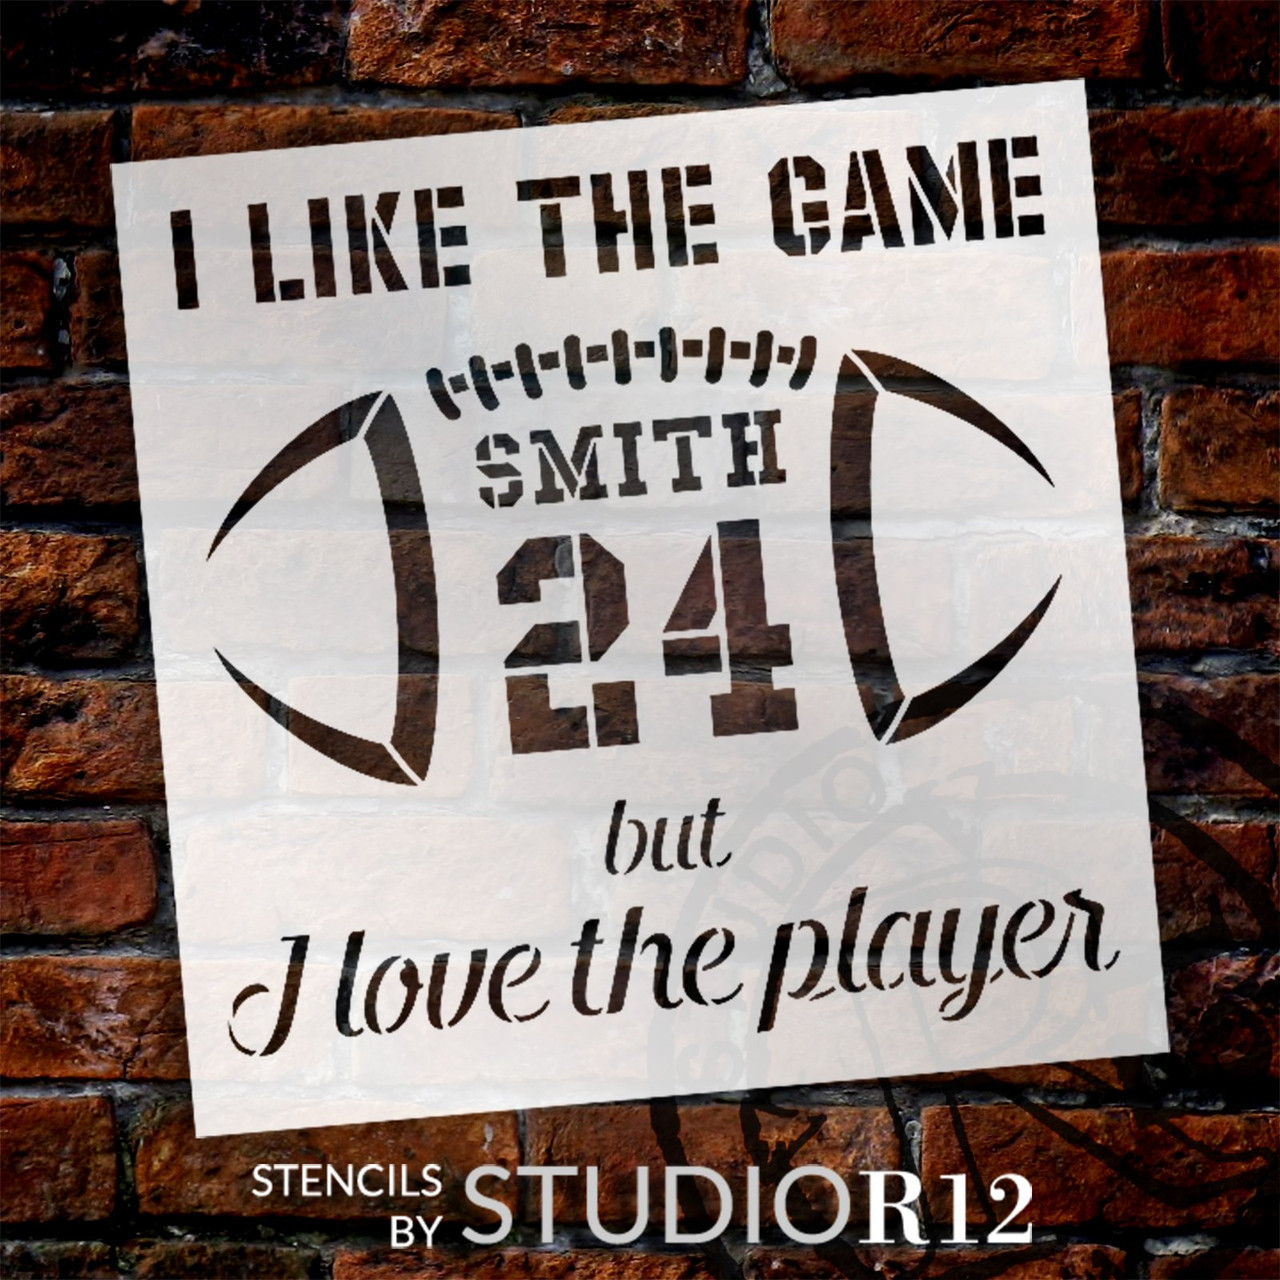 Personalized Like the Game Love the Player Stencil by StudioR12 - Select Size - USA Made - Craft DIY Sports Player Home Decor | Paint Custom Wood Sign for Porch, Yard | Reusable Template | PRST6673